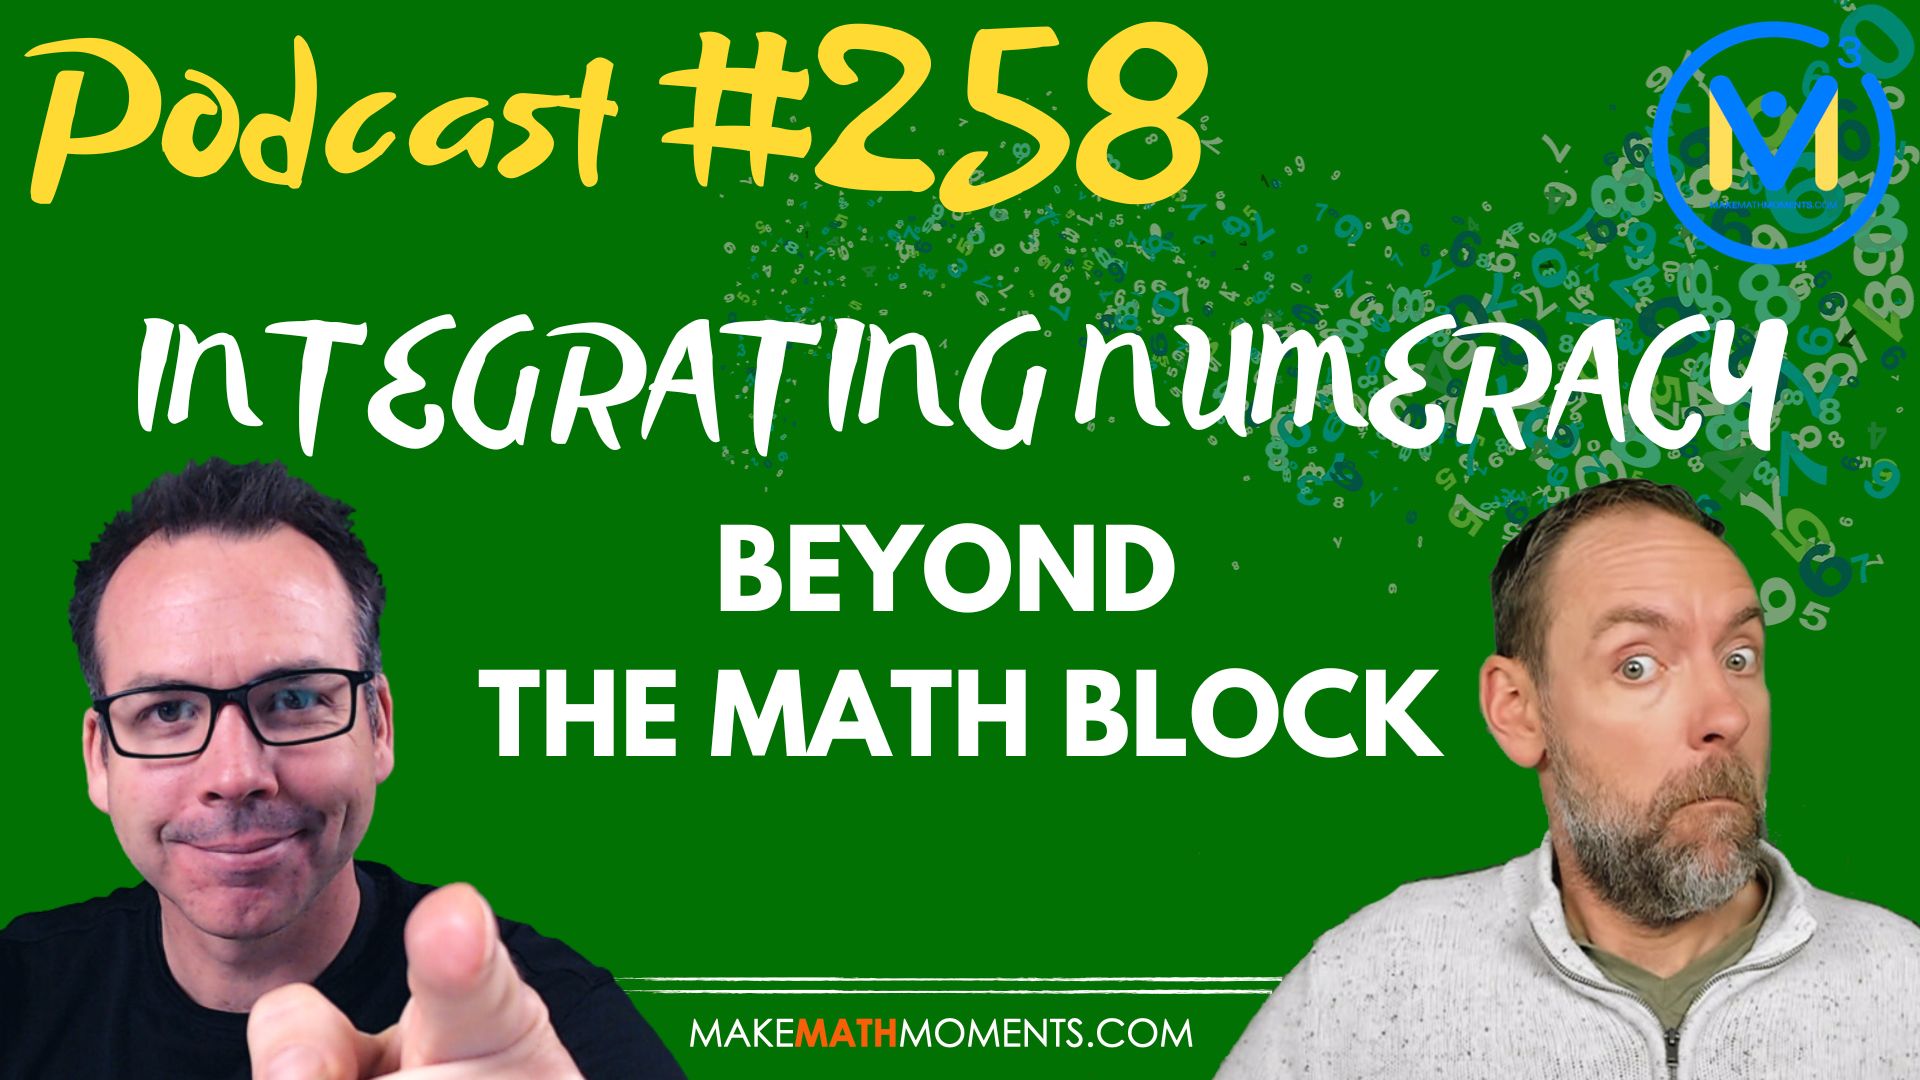 Episode #258: Integrating Numeracy Beyond the Math Block: An interview with Kendra Jacobs